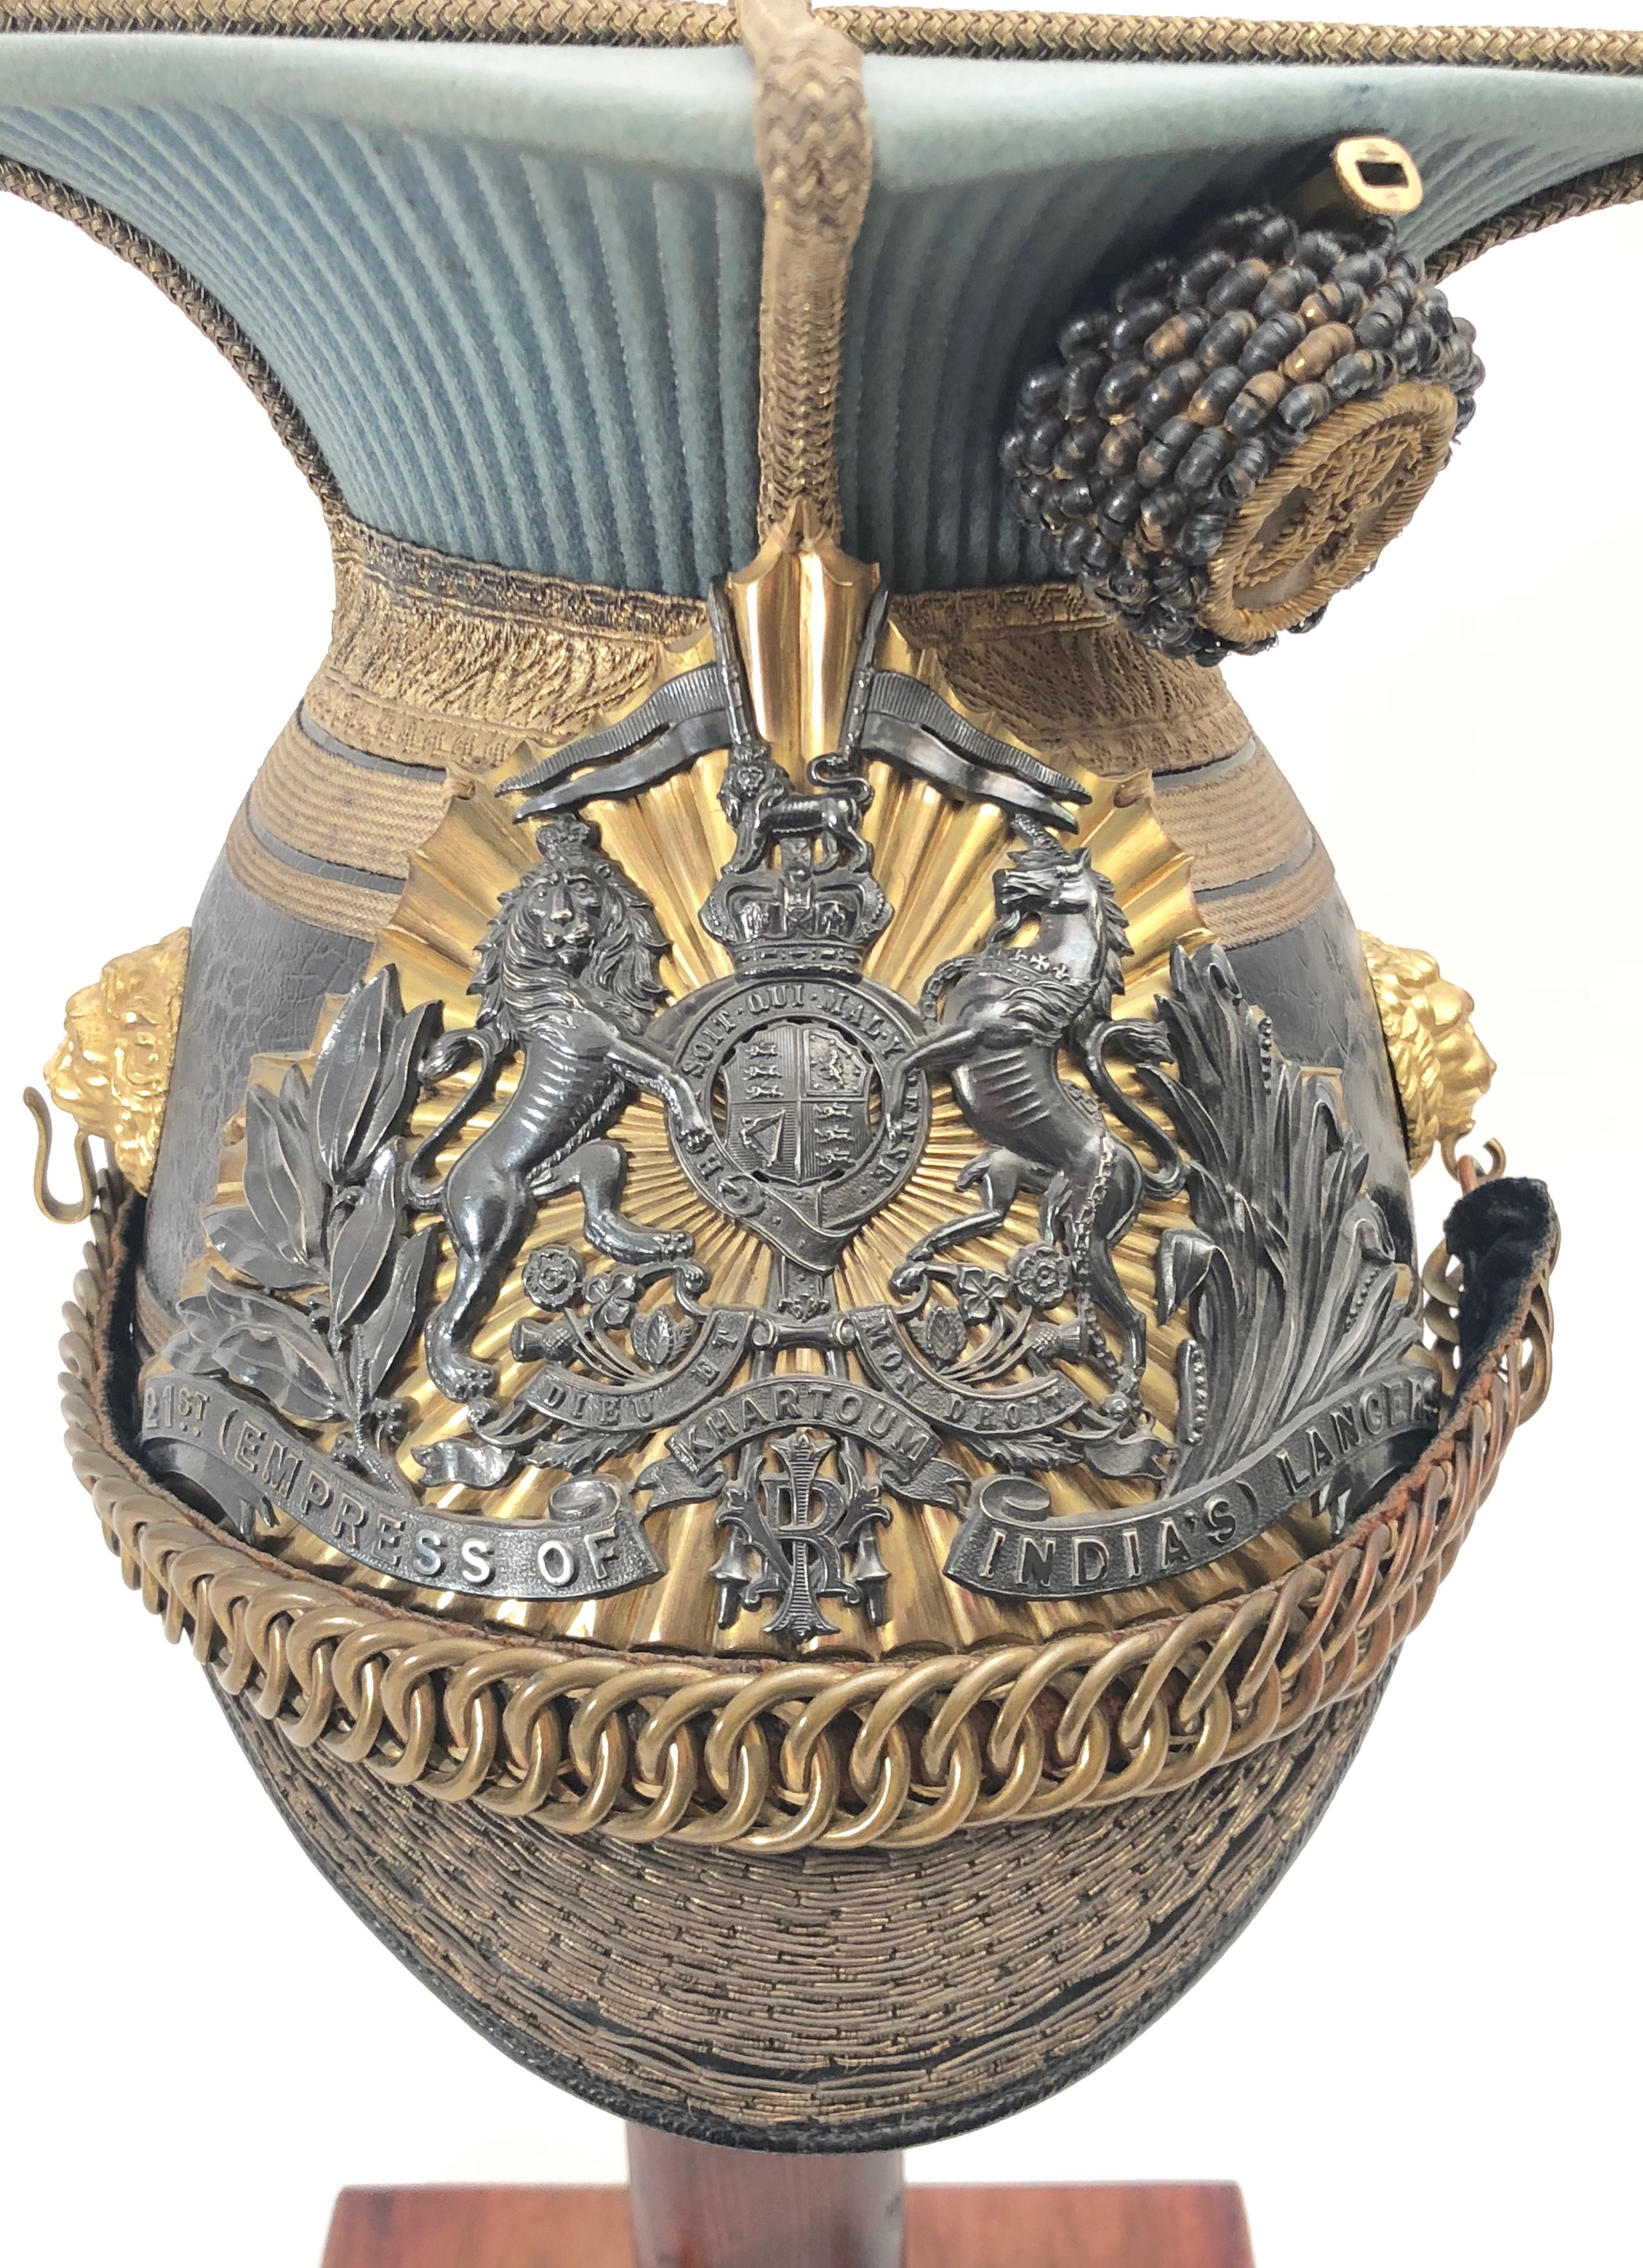 21st (Empress of India) Lancers Victorian Attributed Officer Lance Cap circa 1899-1901. Attributed - Image 7 of 10